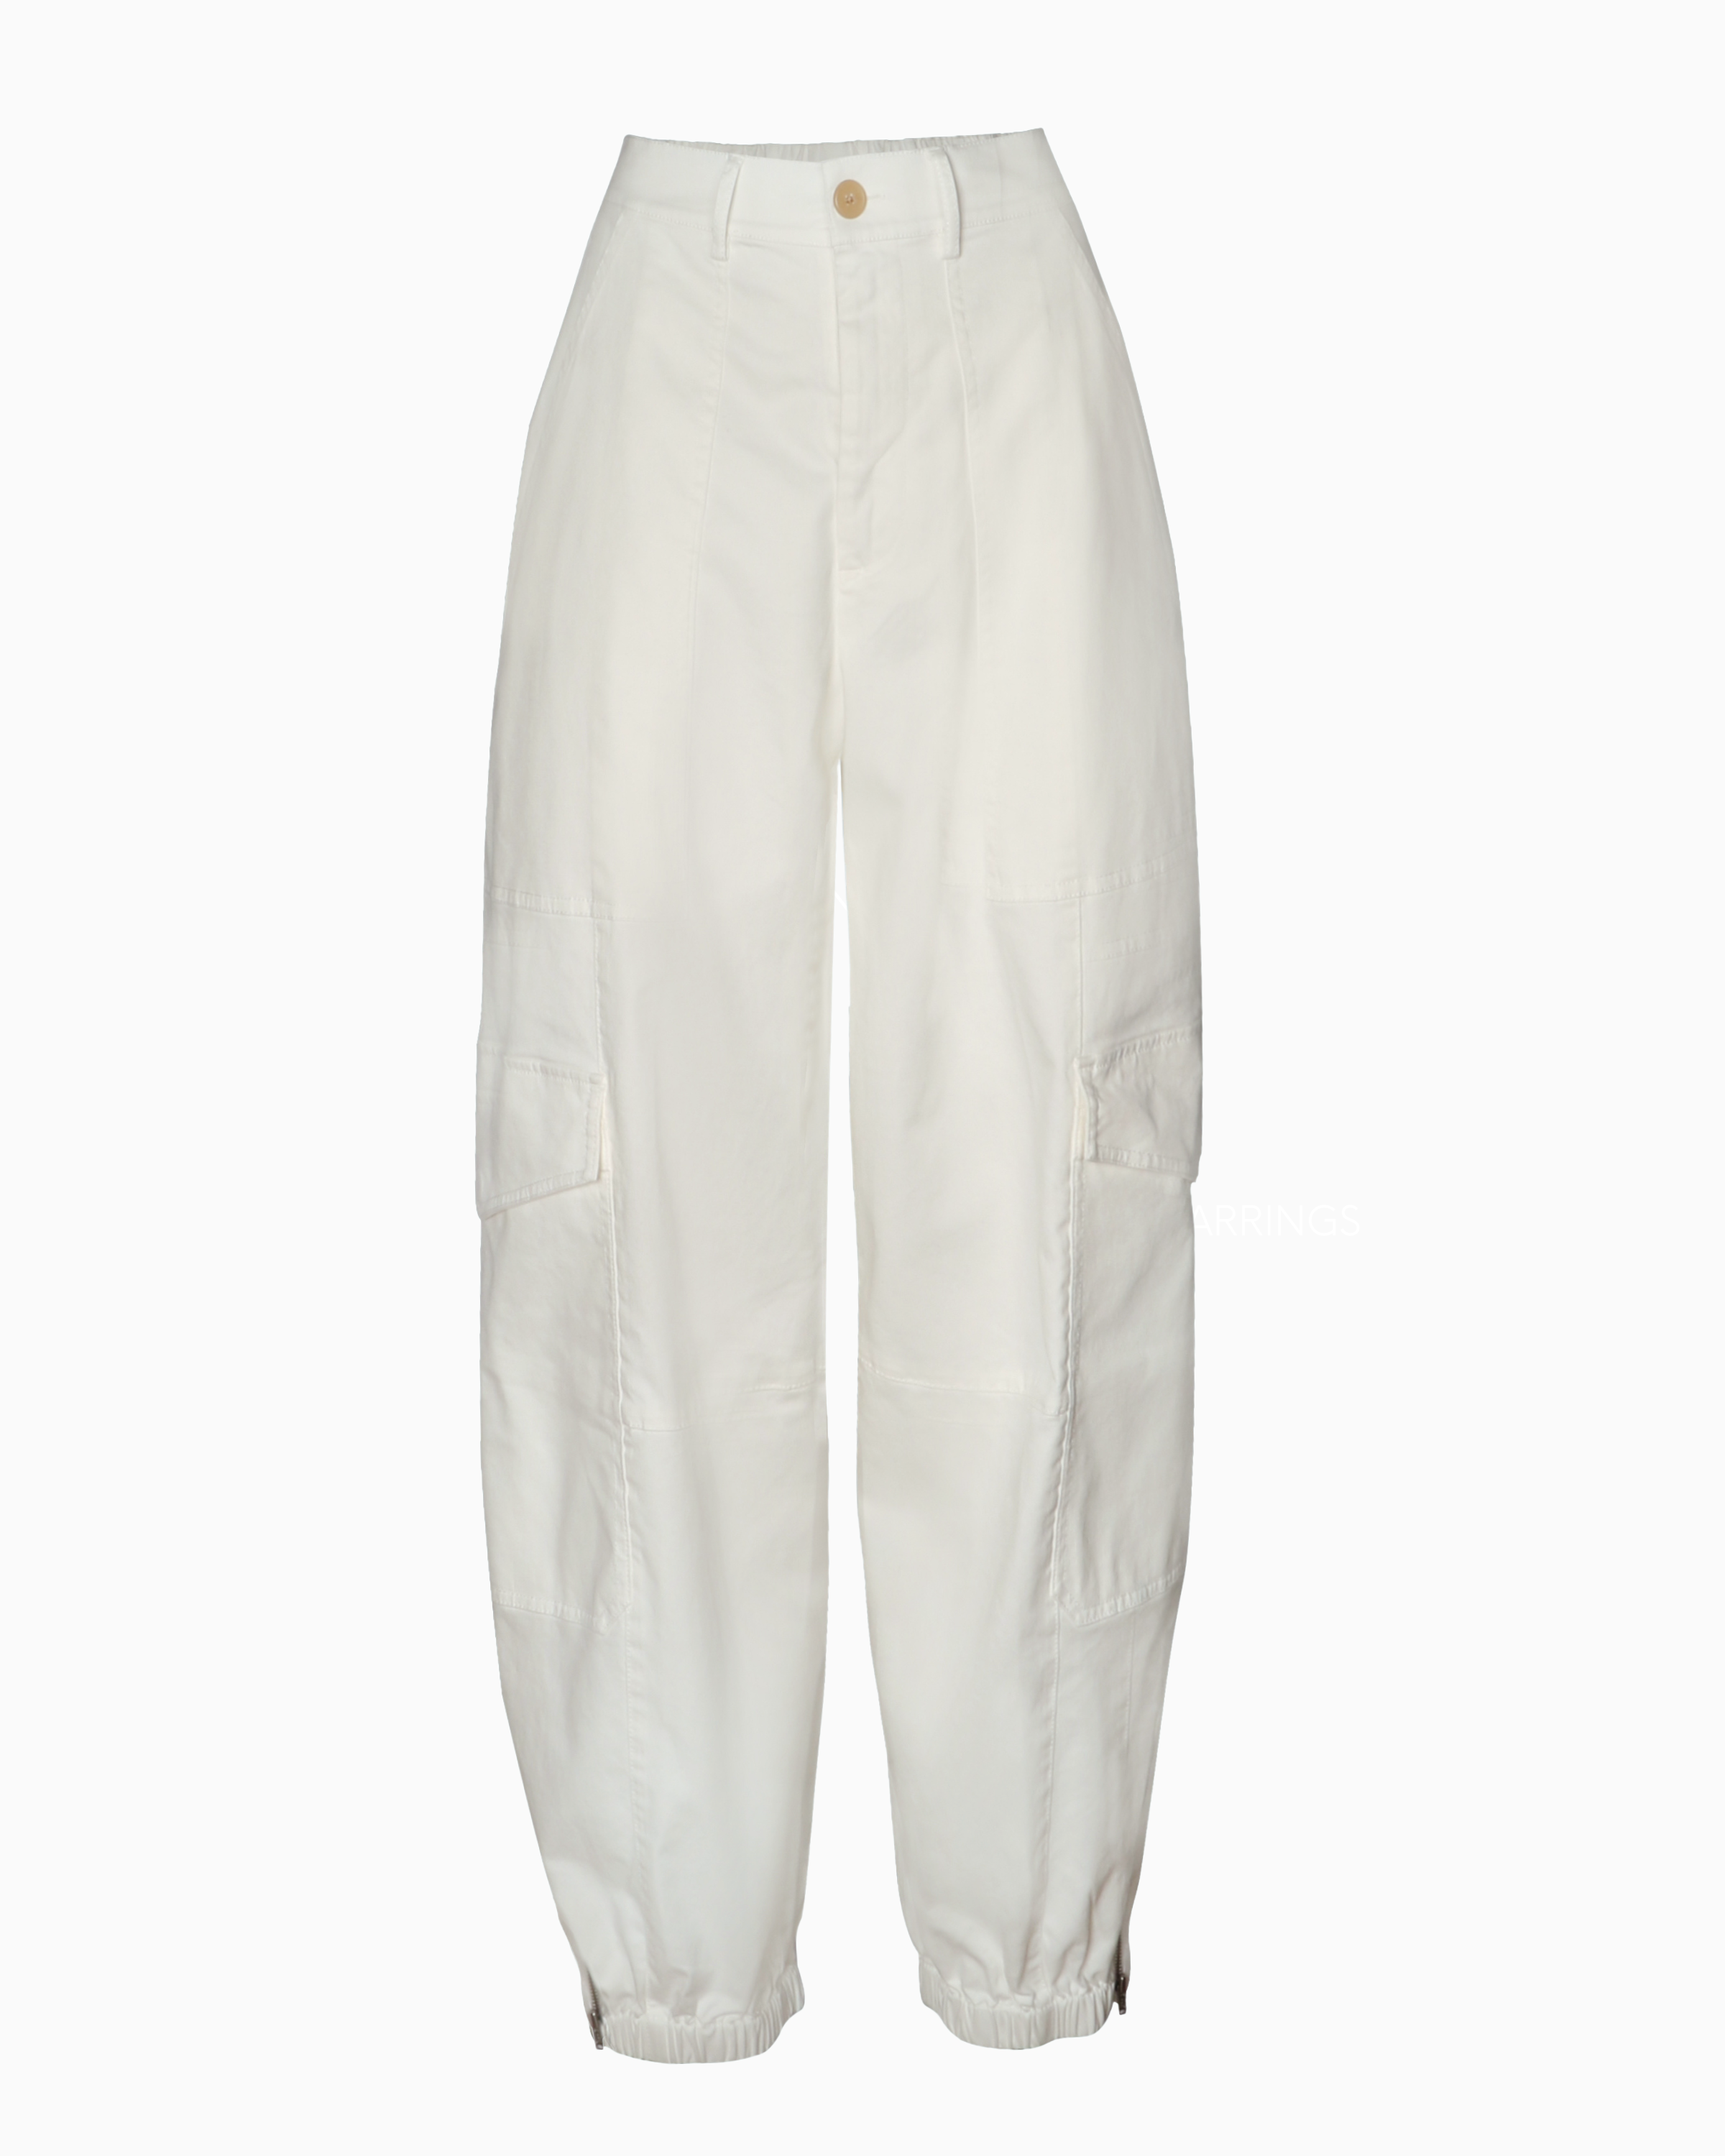 ATM Cotton Twill Cargo Pant in Chalk